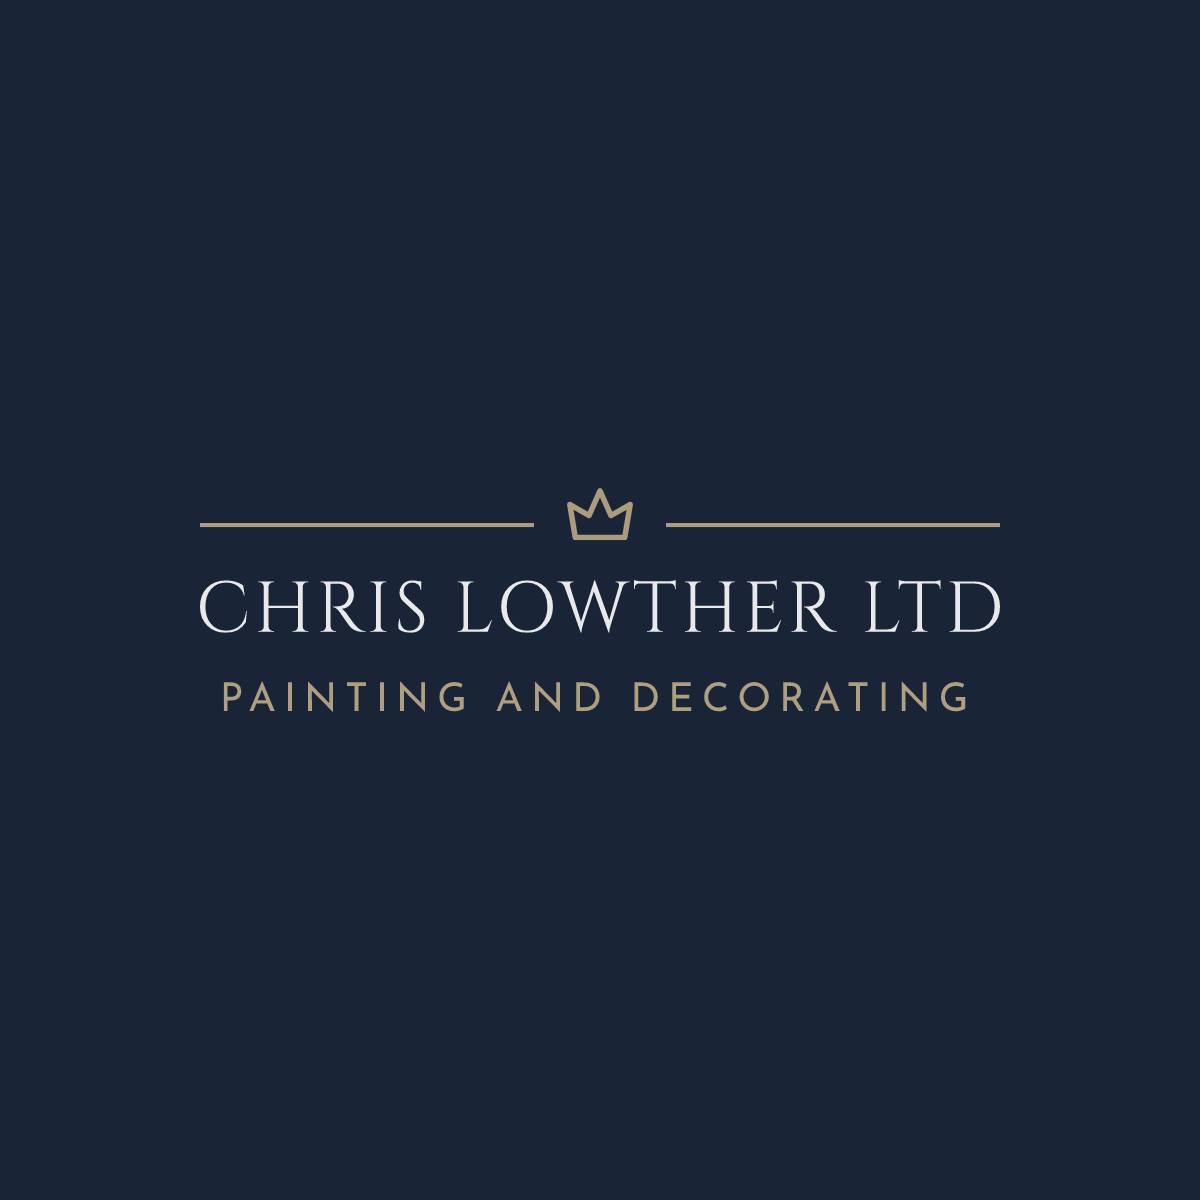 Images Chris Lowther Ltd